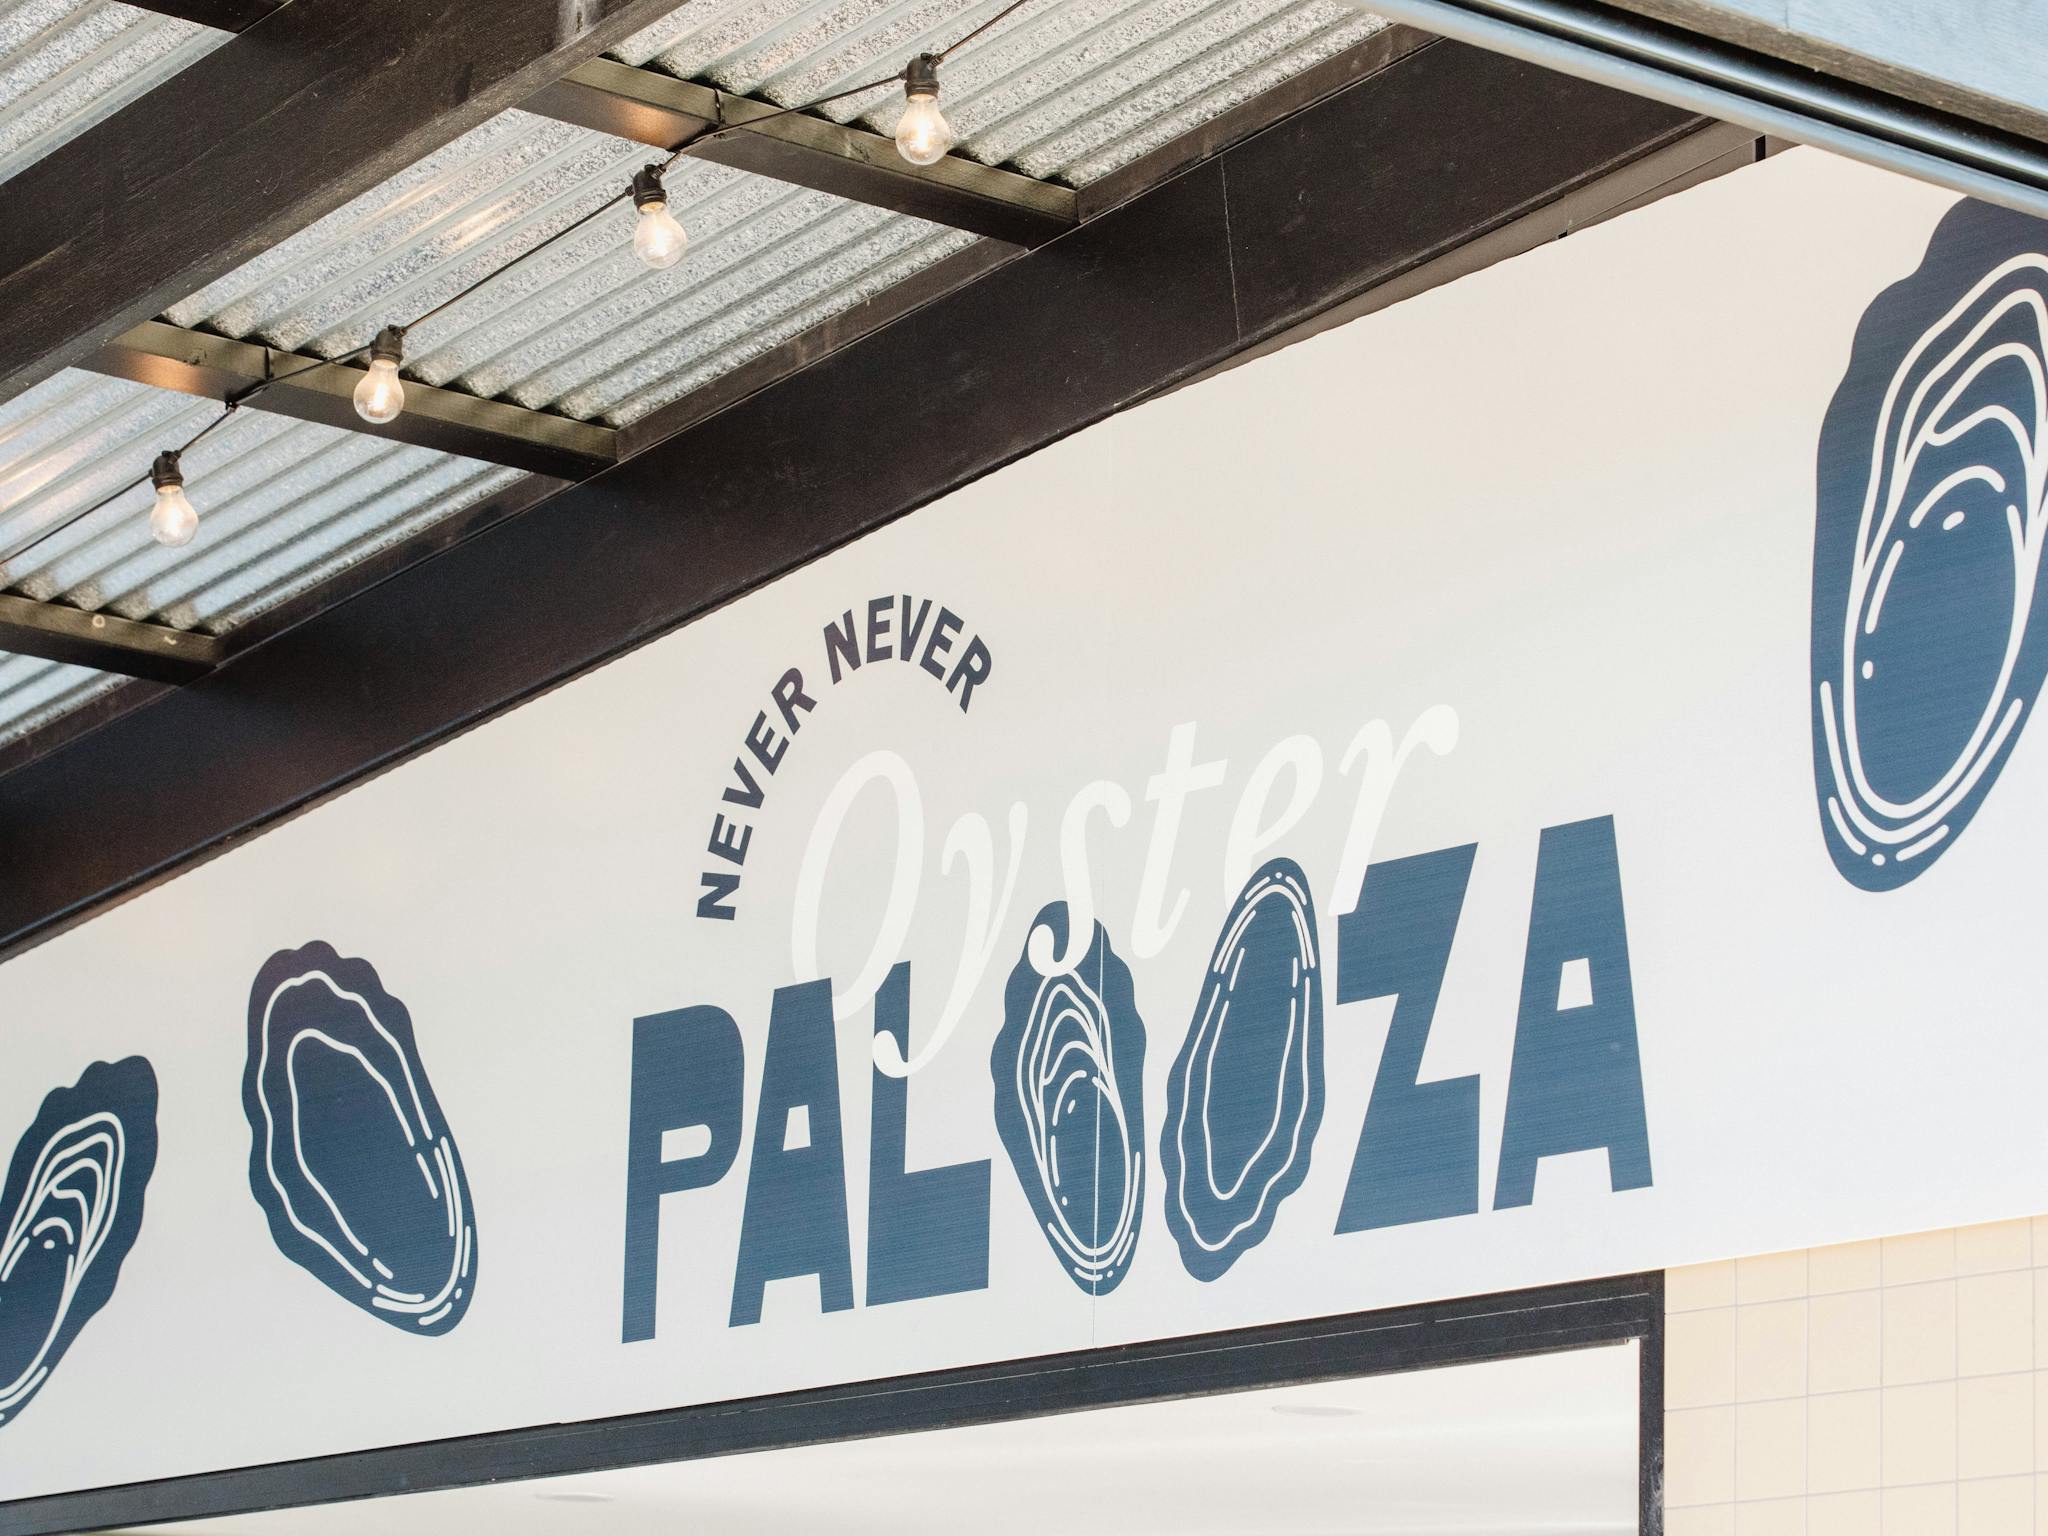 The Oyster Palooza sign at Never Never Distilling Co.